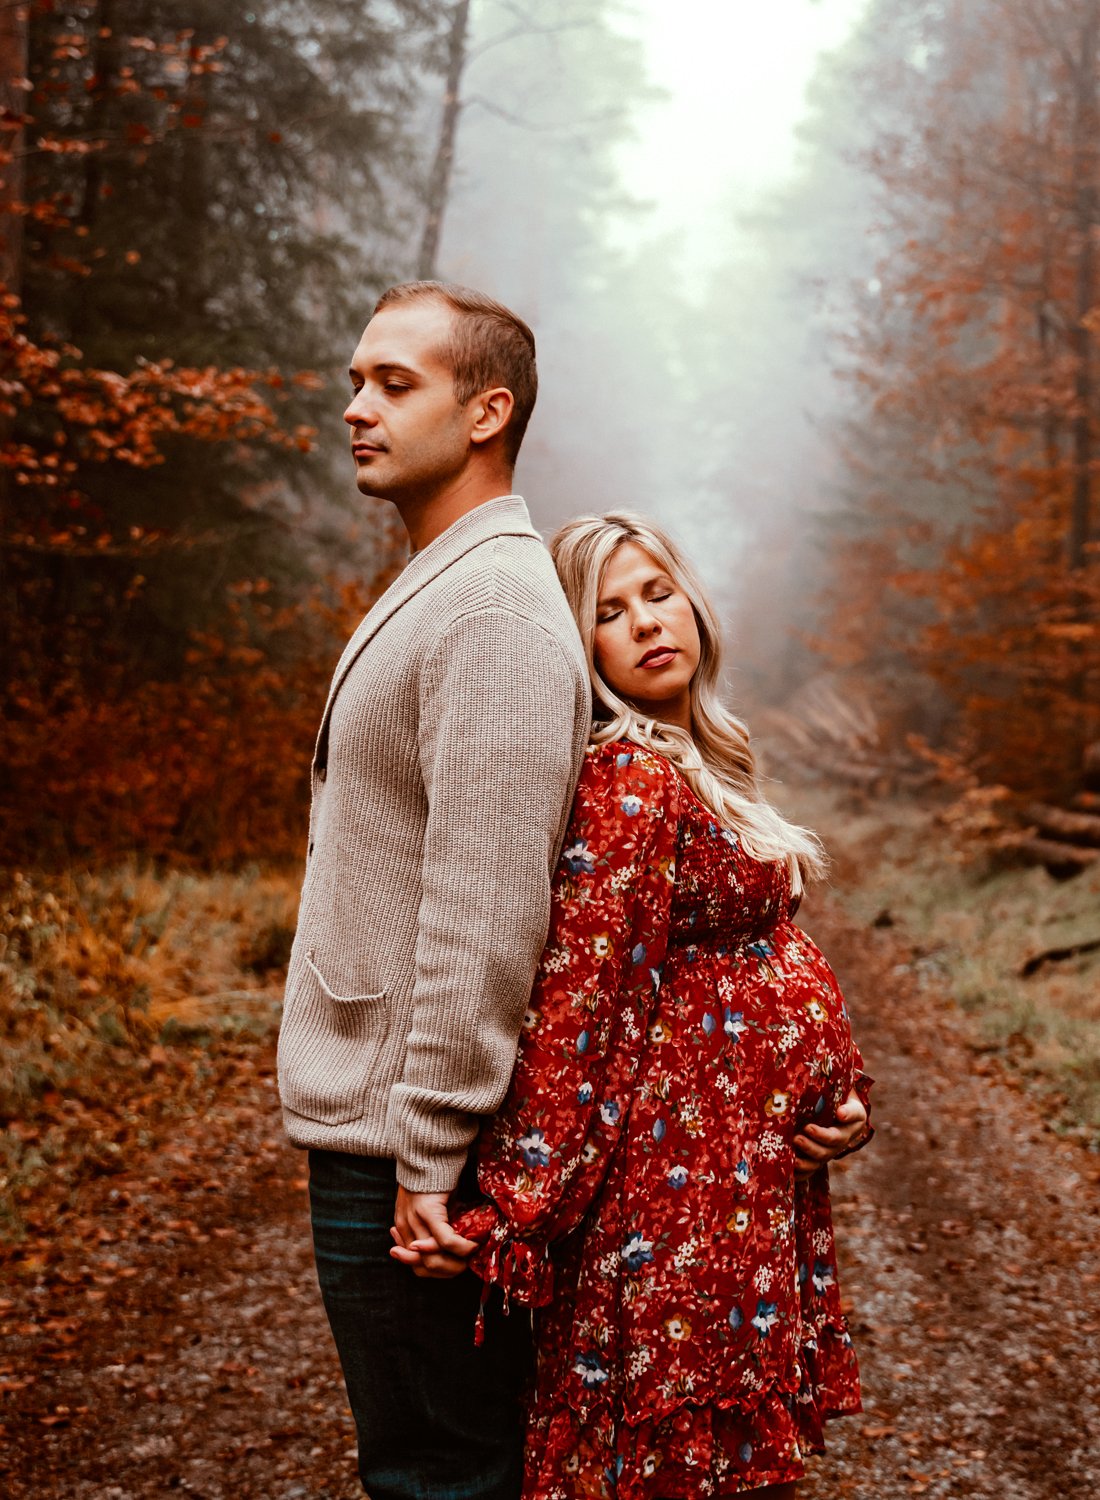 moody-maternity-couple-session-in-fall-season-in-wooded-forest-in-germany-by-motherhood-photographer-sarah-havens-ramtein (6).jpg